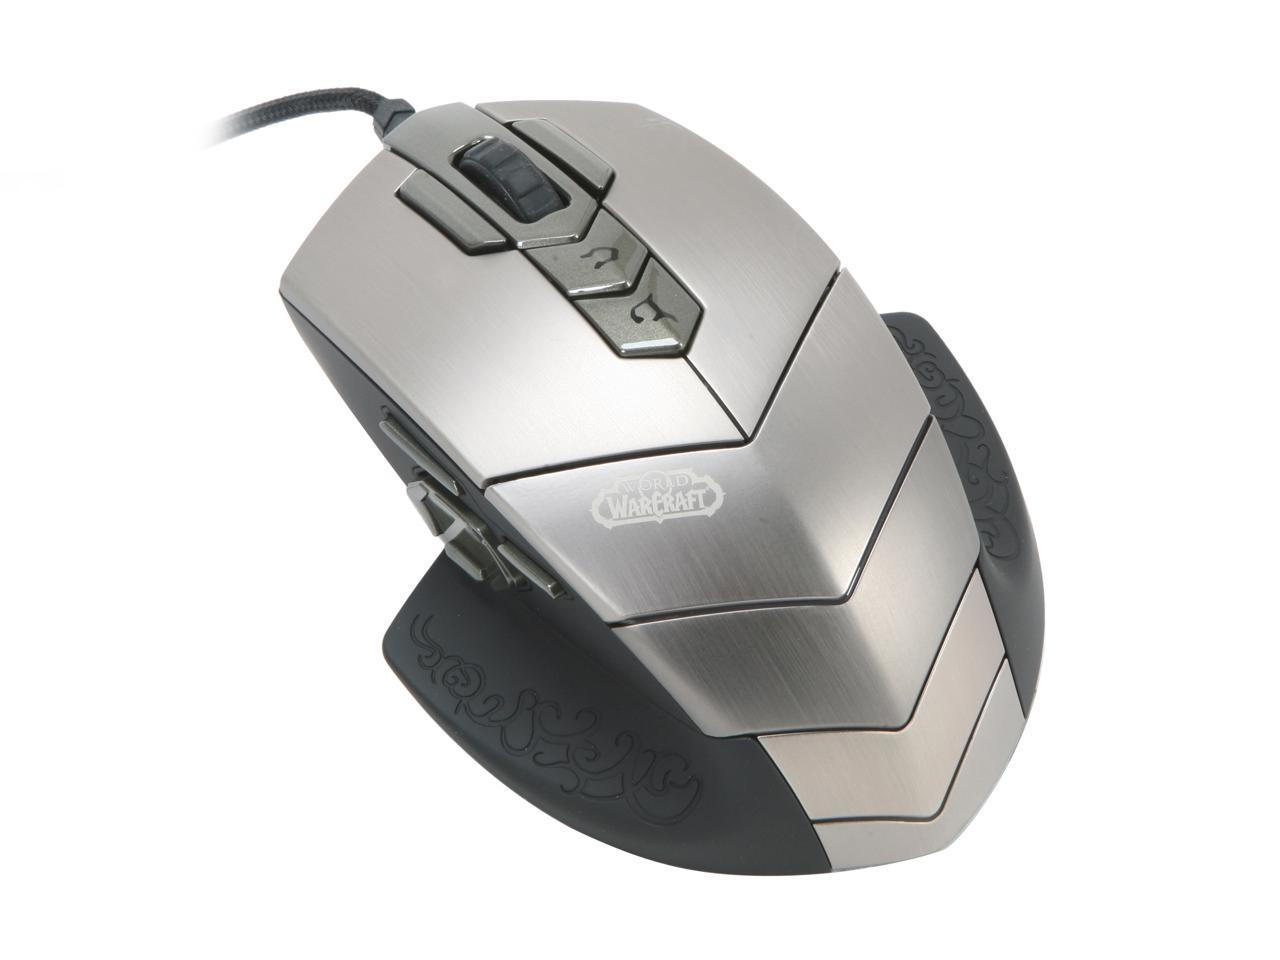 steelseries wow mouse how to configure